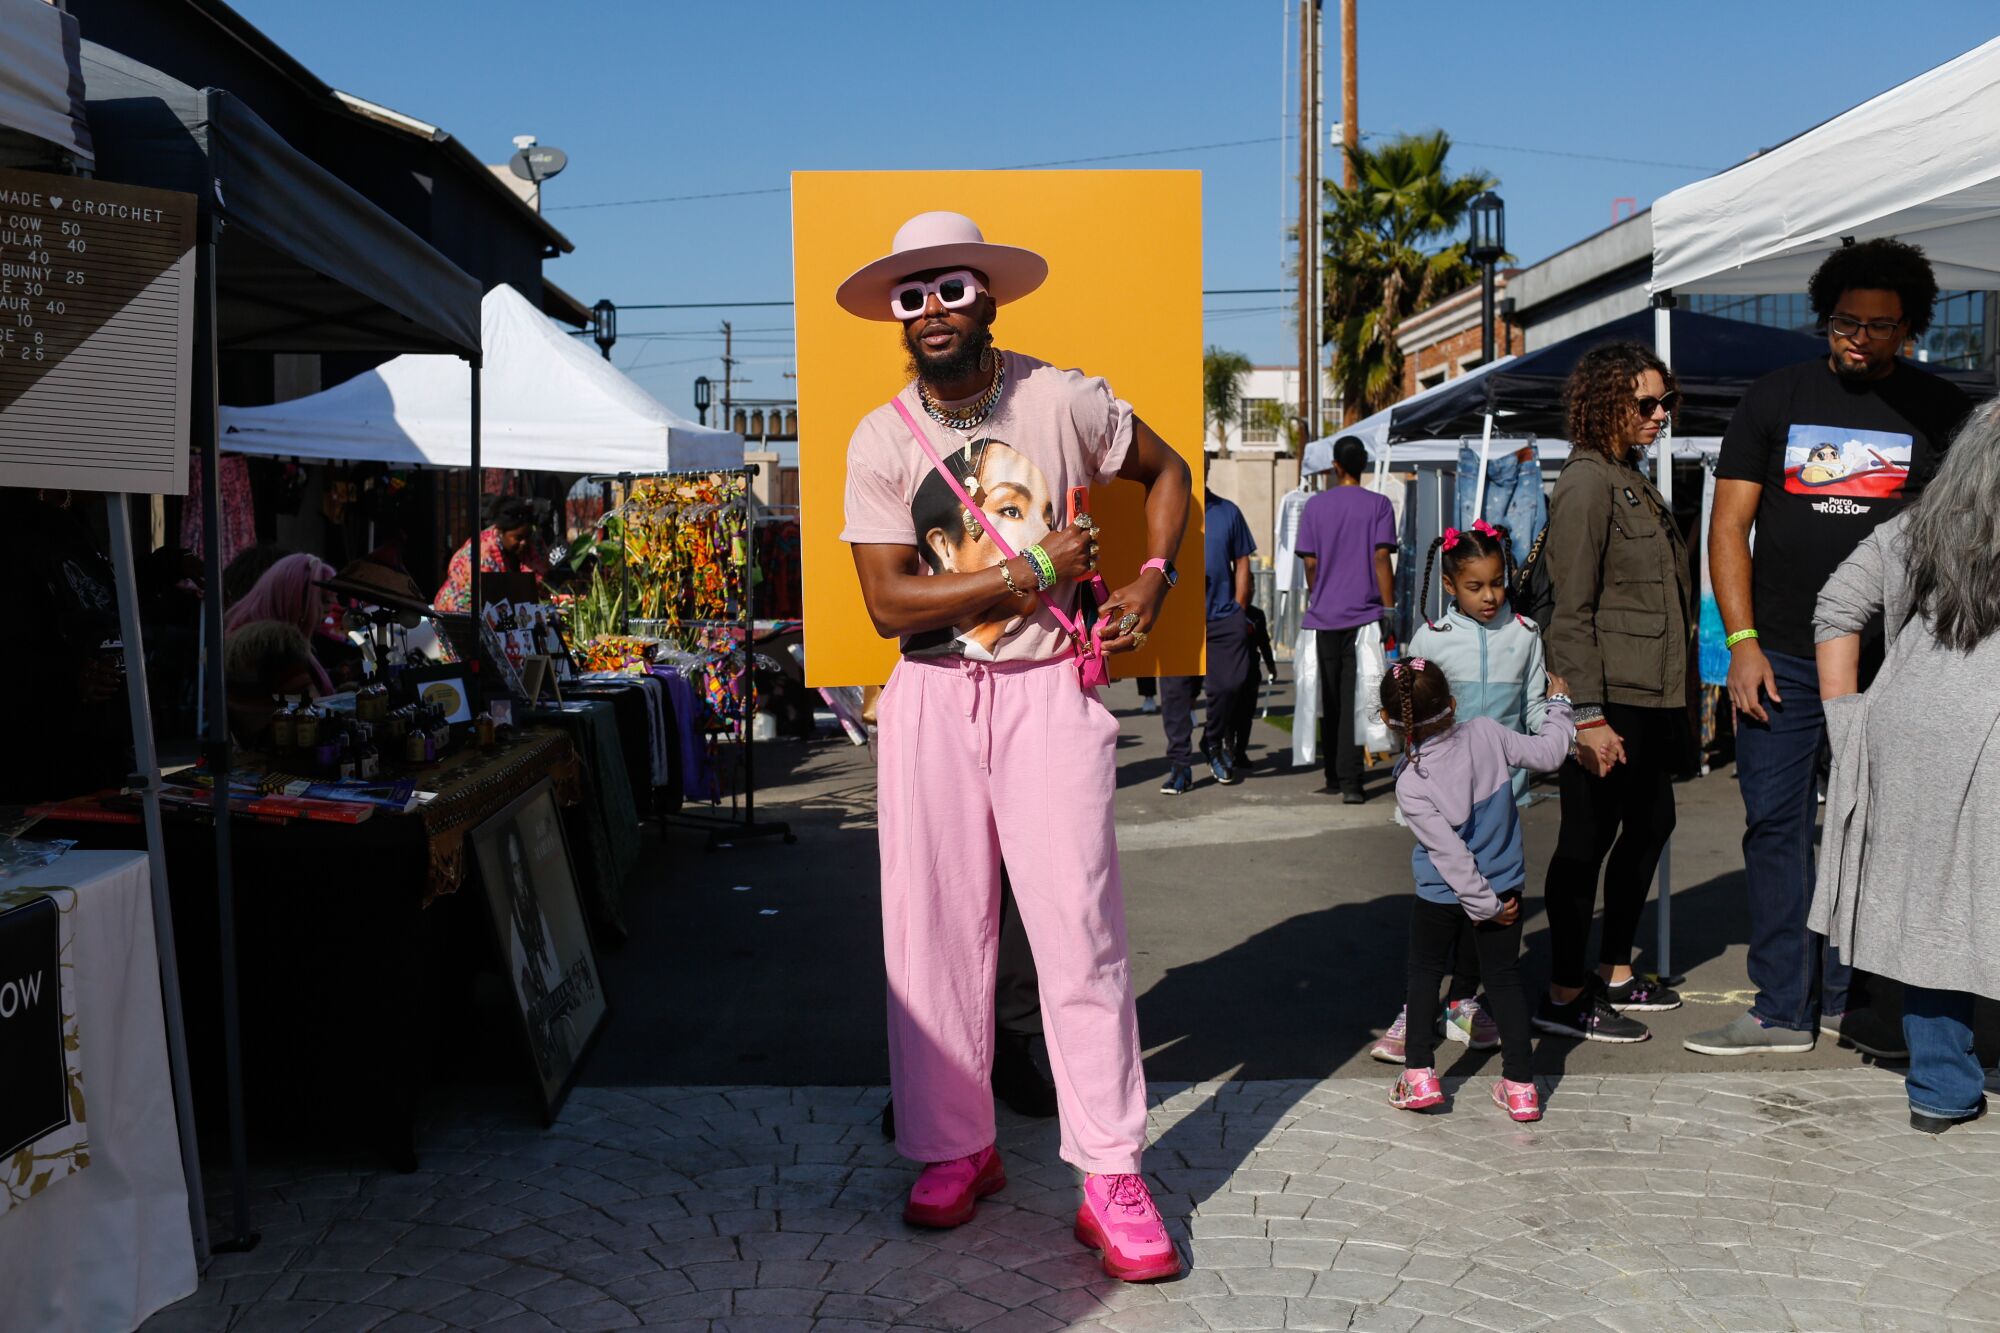 A person in pink pants and shoes, printed T-shirt and broad-brimmed white hat stands at an outdoor flea market.